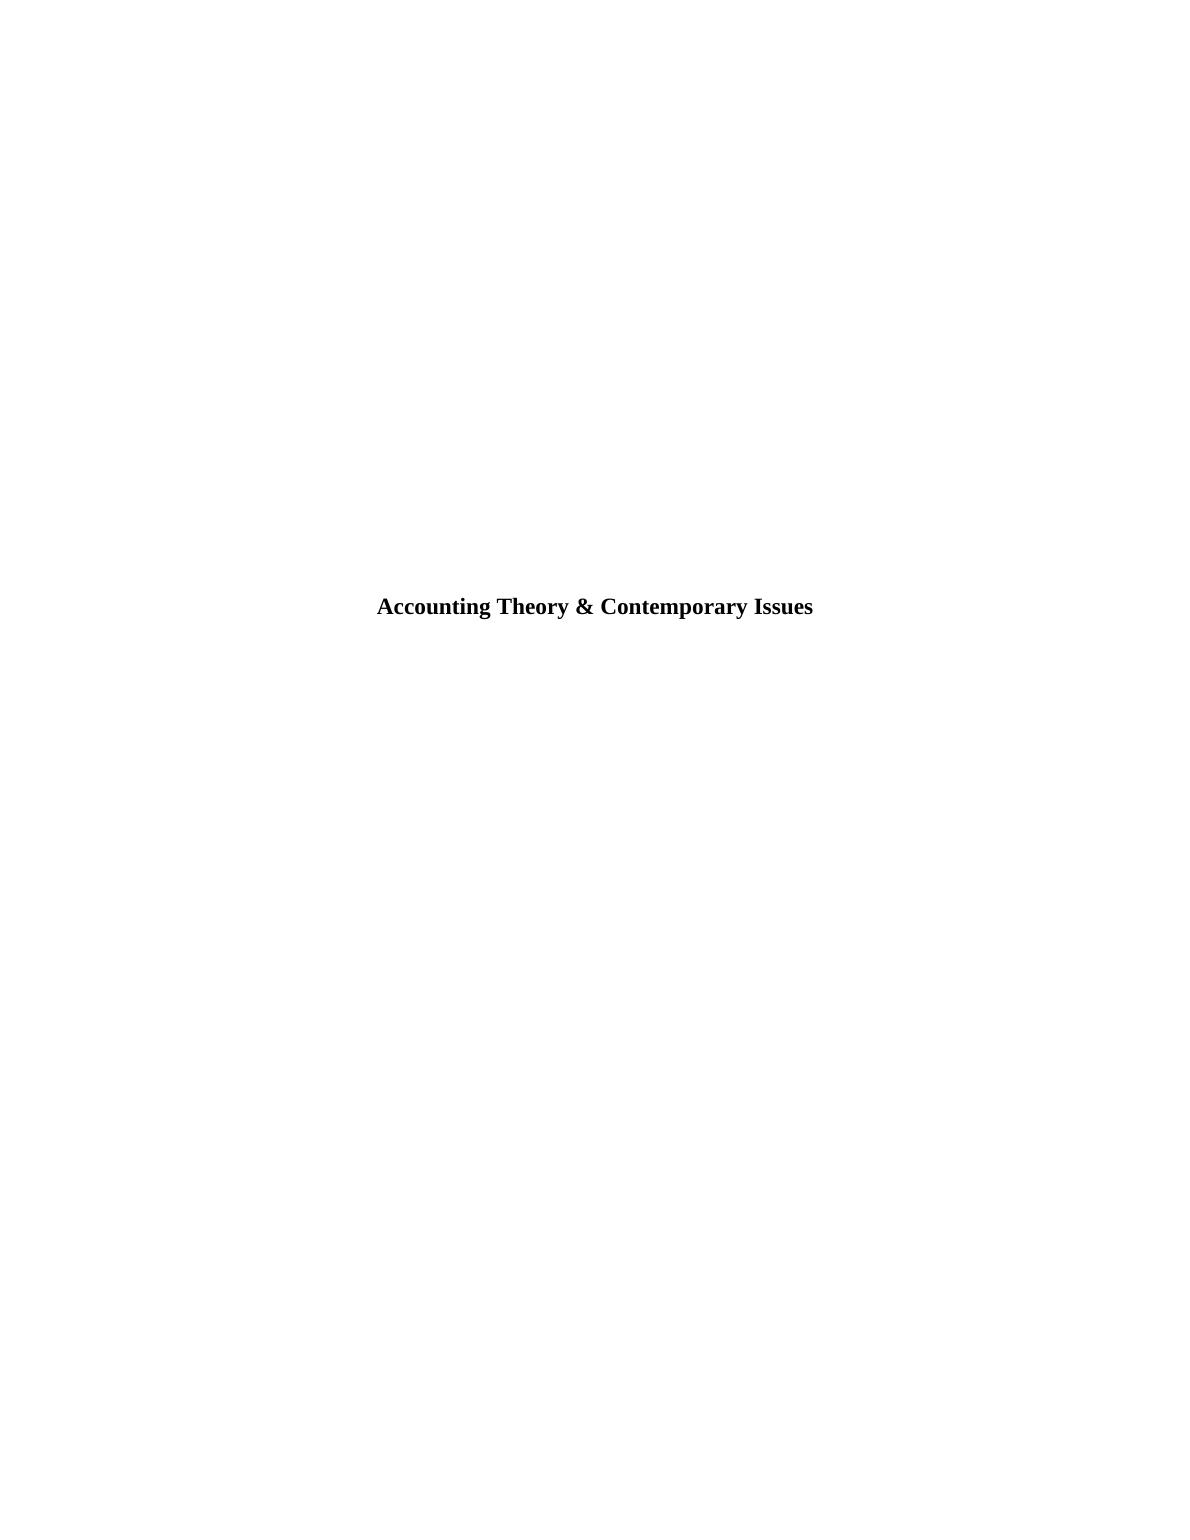 ACC566 - Accounting Theory & Contemporary Issues_1